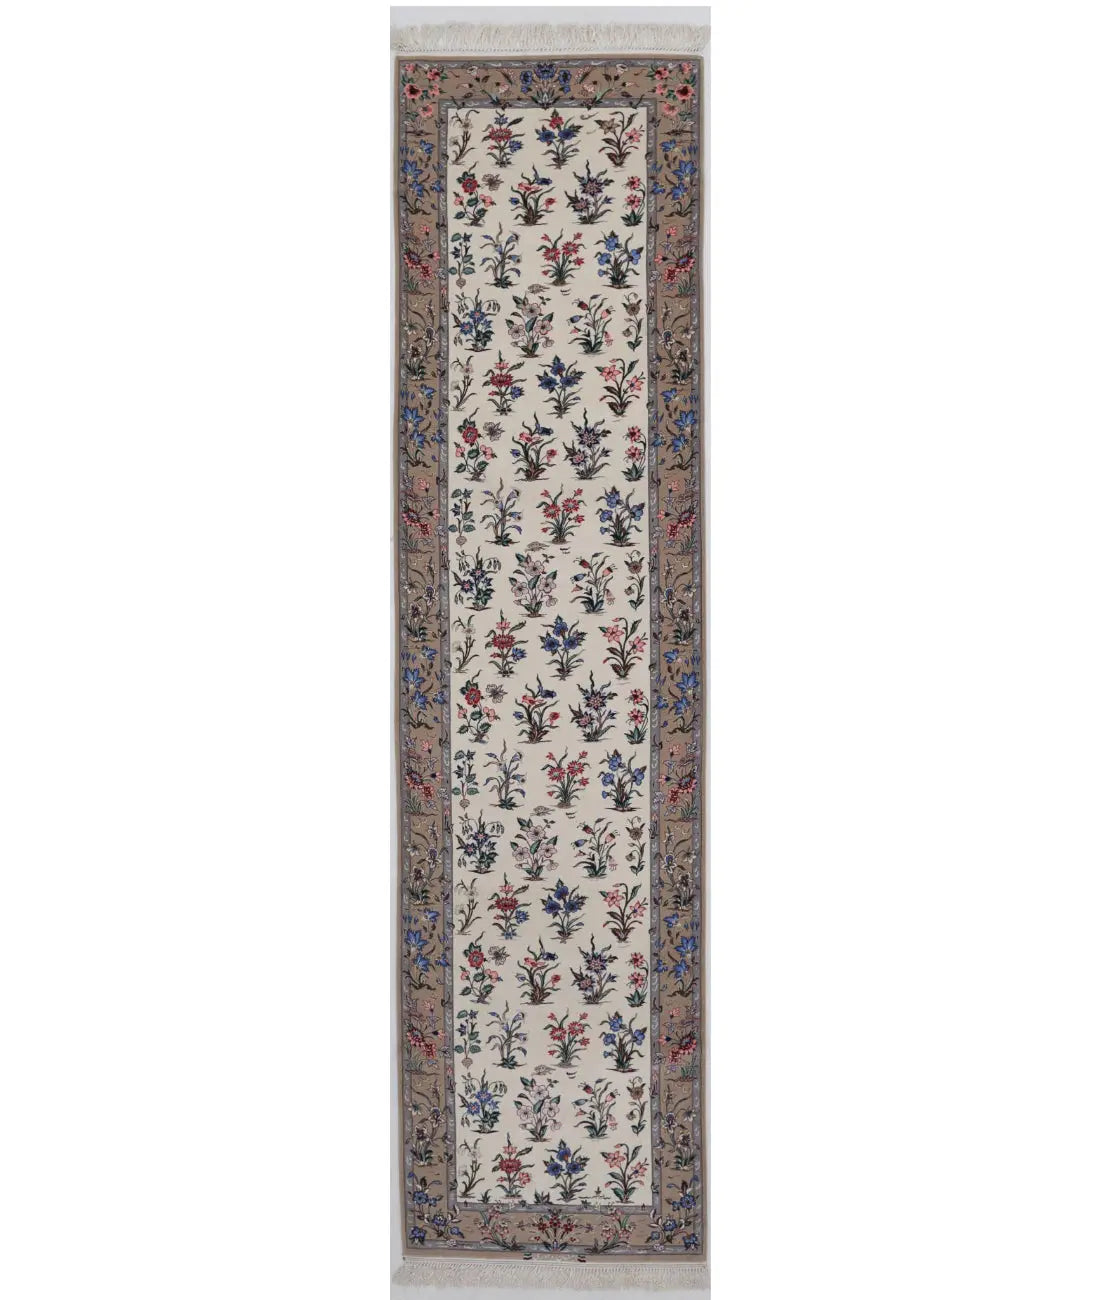 Hand Knotted Antique Masterpiece Persian Isfahan Wool &amp; Silk Rug - 2&#39;9&#39;&#39; x 11&#39;7&#39;&#39; - Arteverk Rugs Area rug